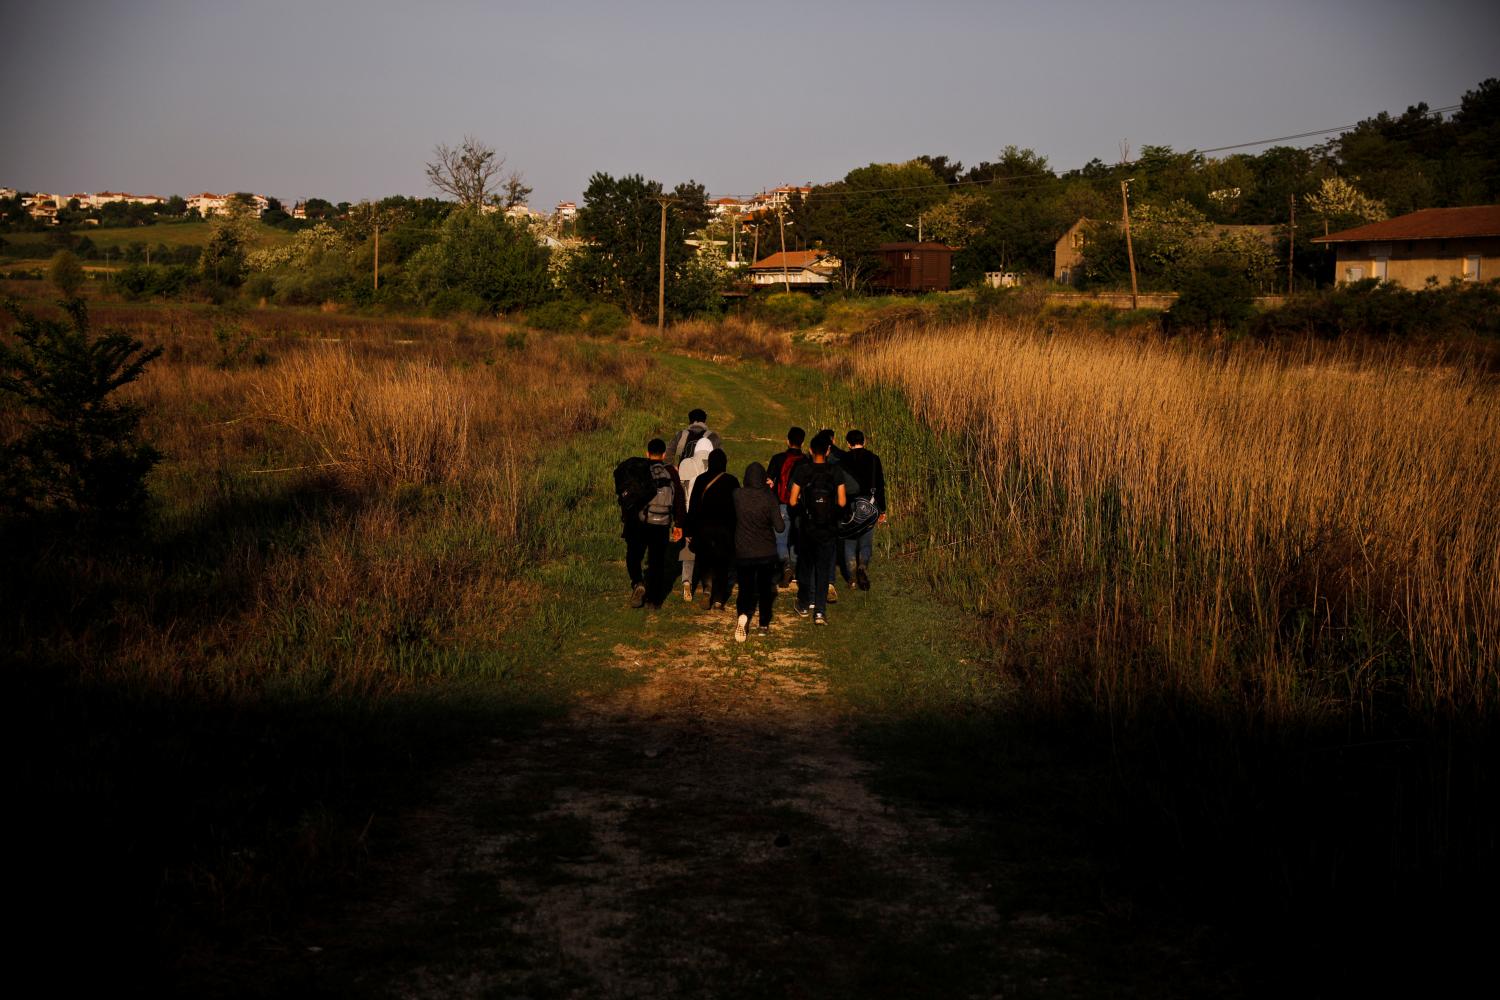 A group of Syrian refugees who crossed the Evros river, the natural border between Greece and Turkey, walks towards the city of Didymoteicho, Greece, April 30, 2018. Picture taken April 30, 2018. REUTERS/Alkis Konstantinidis - RC155DC7E740